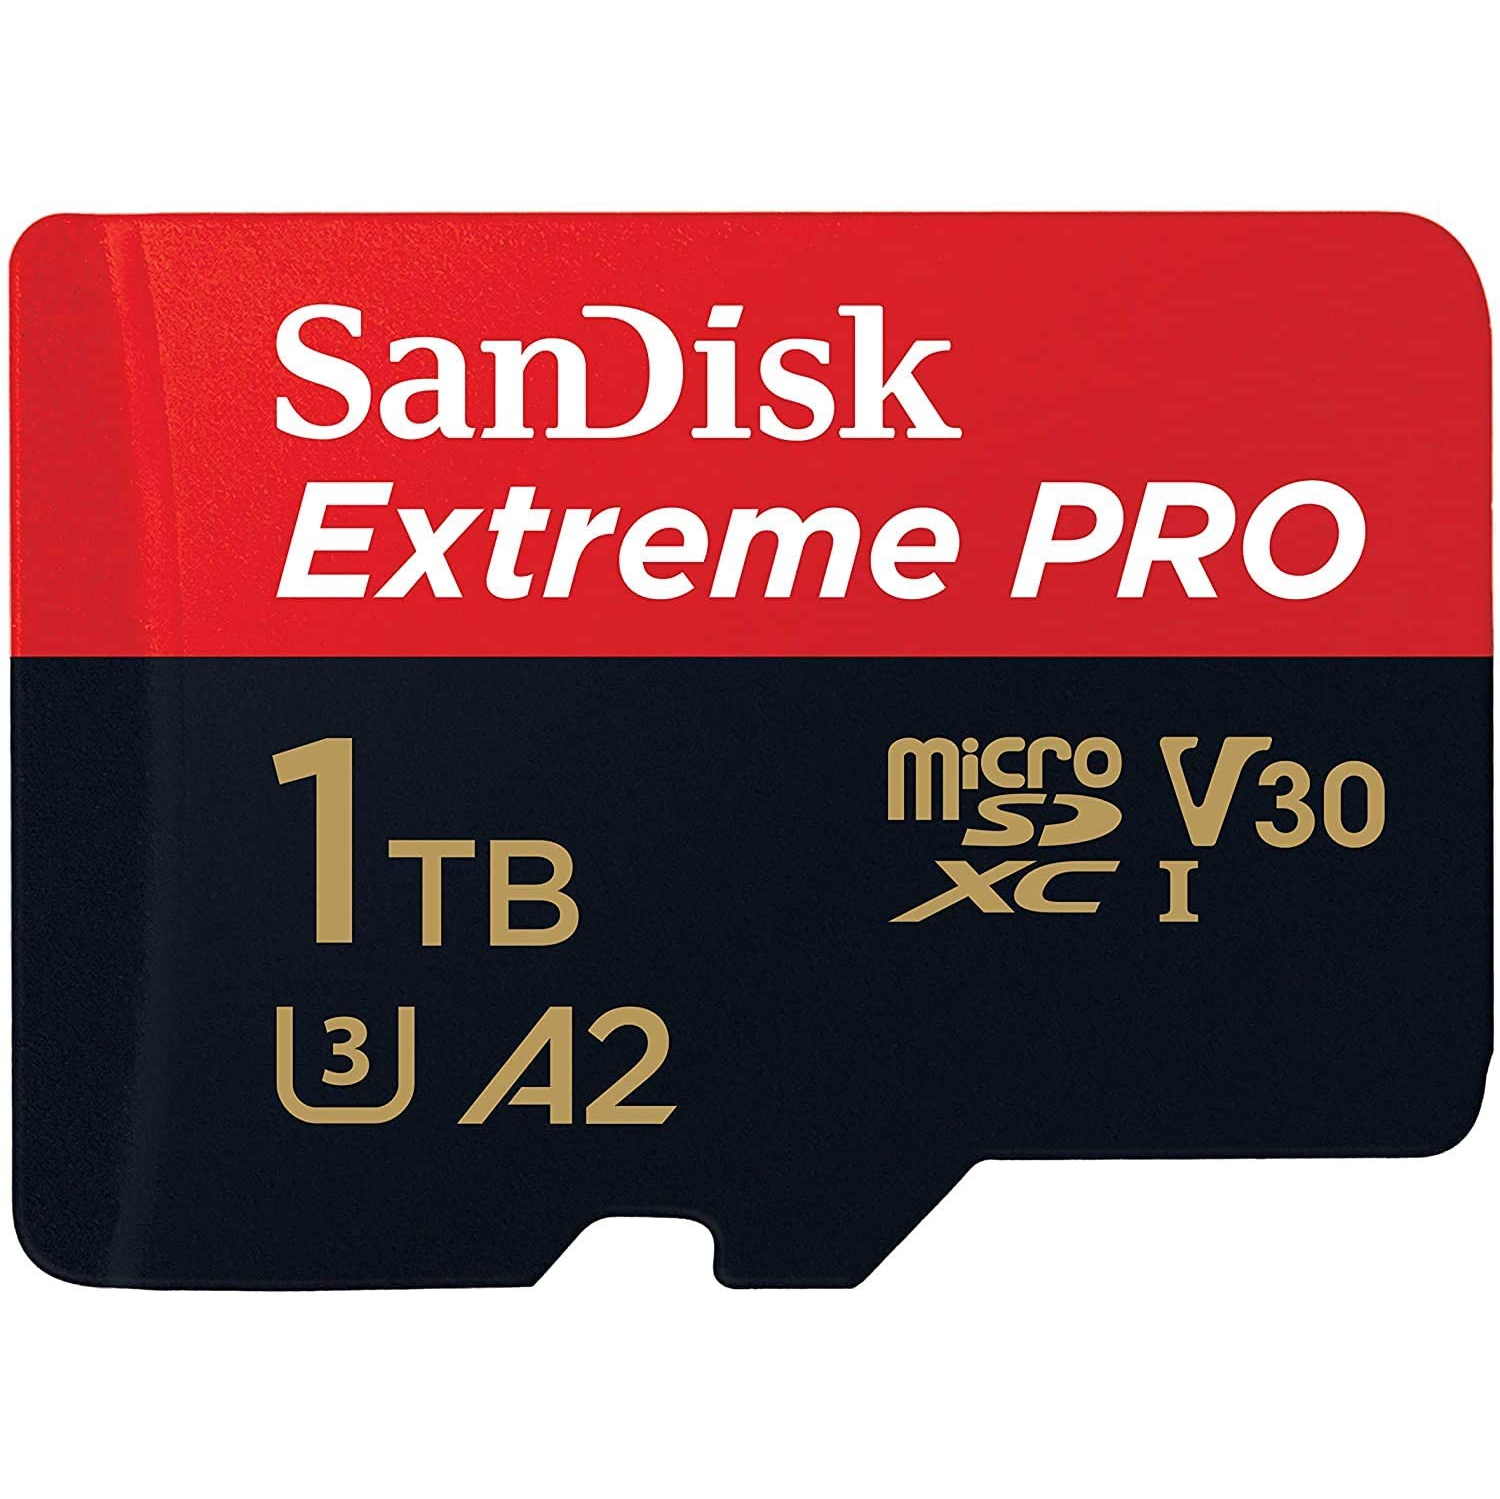 SanDisk Extreme PRO 1TB microSDXC UHS-I micro SD Card with Adapter